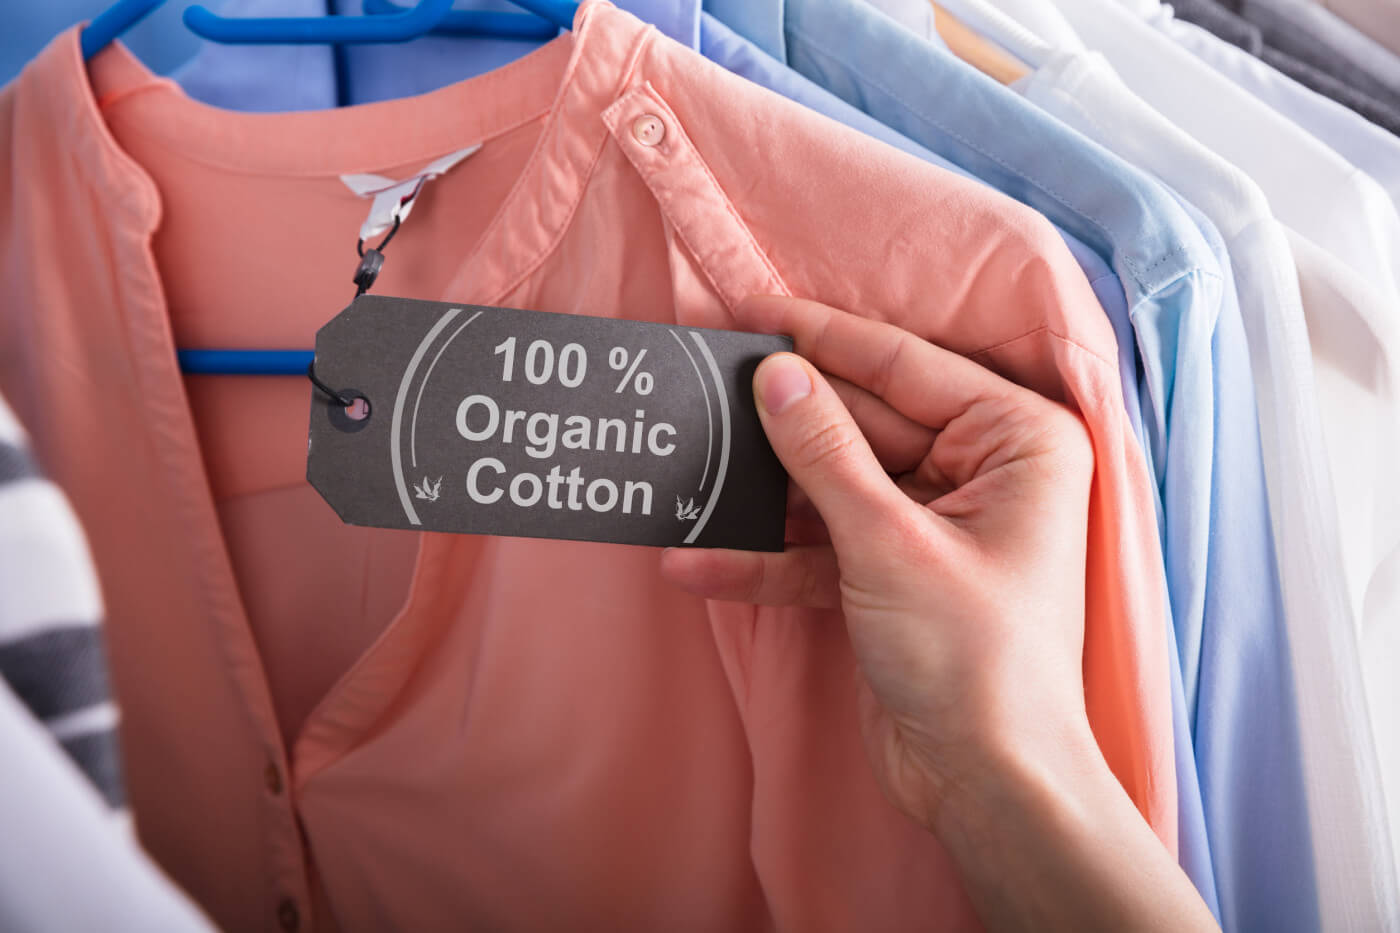 Best Organic Clothing Brands For Showing Off Your Values